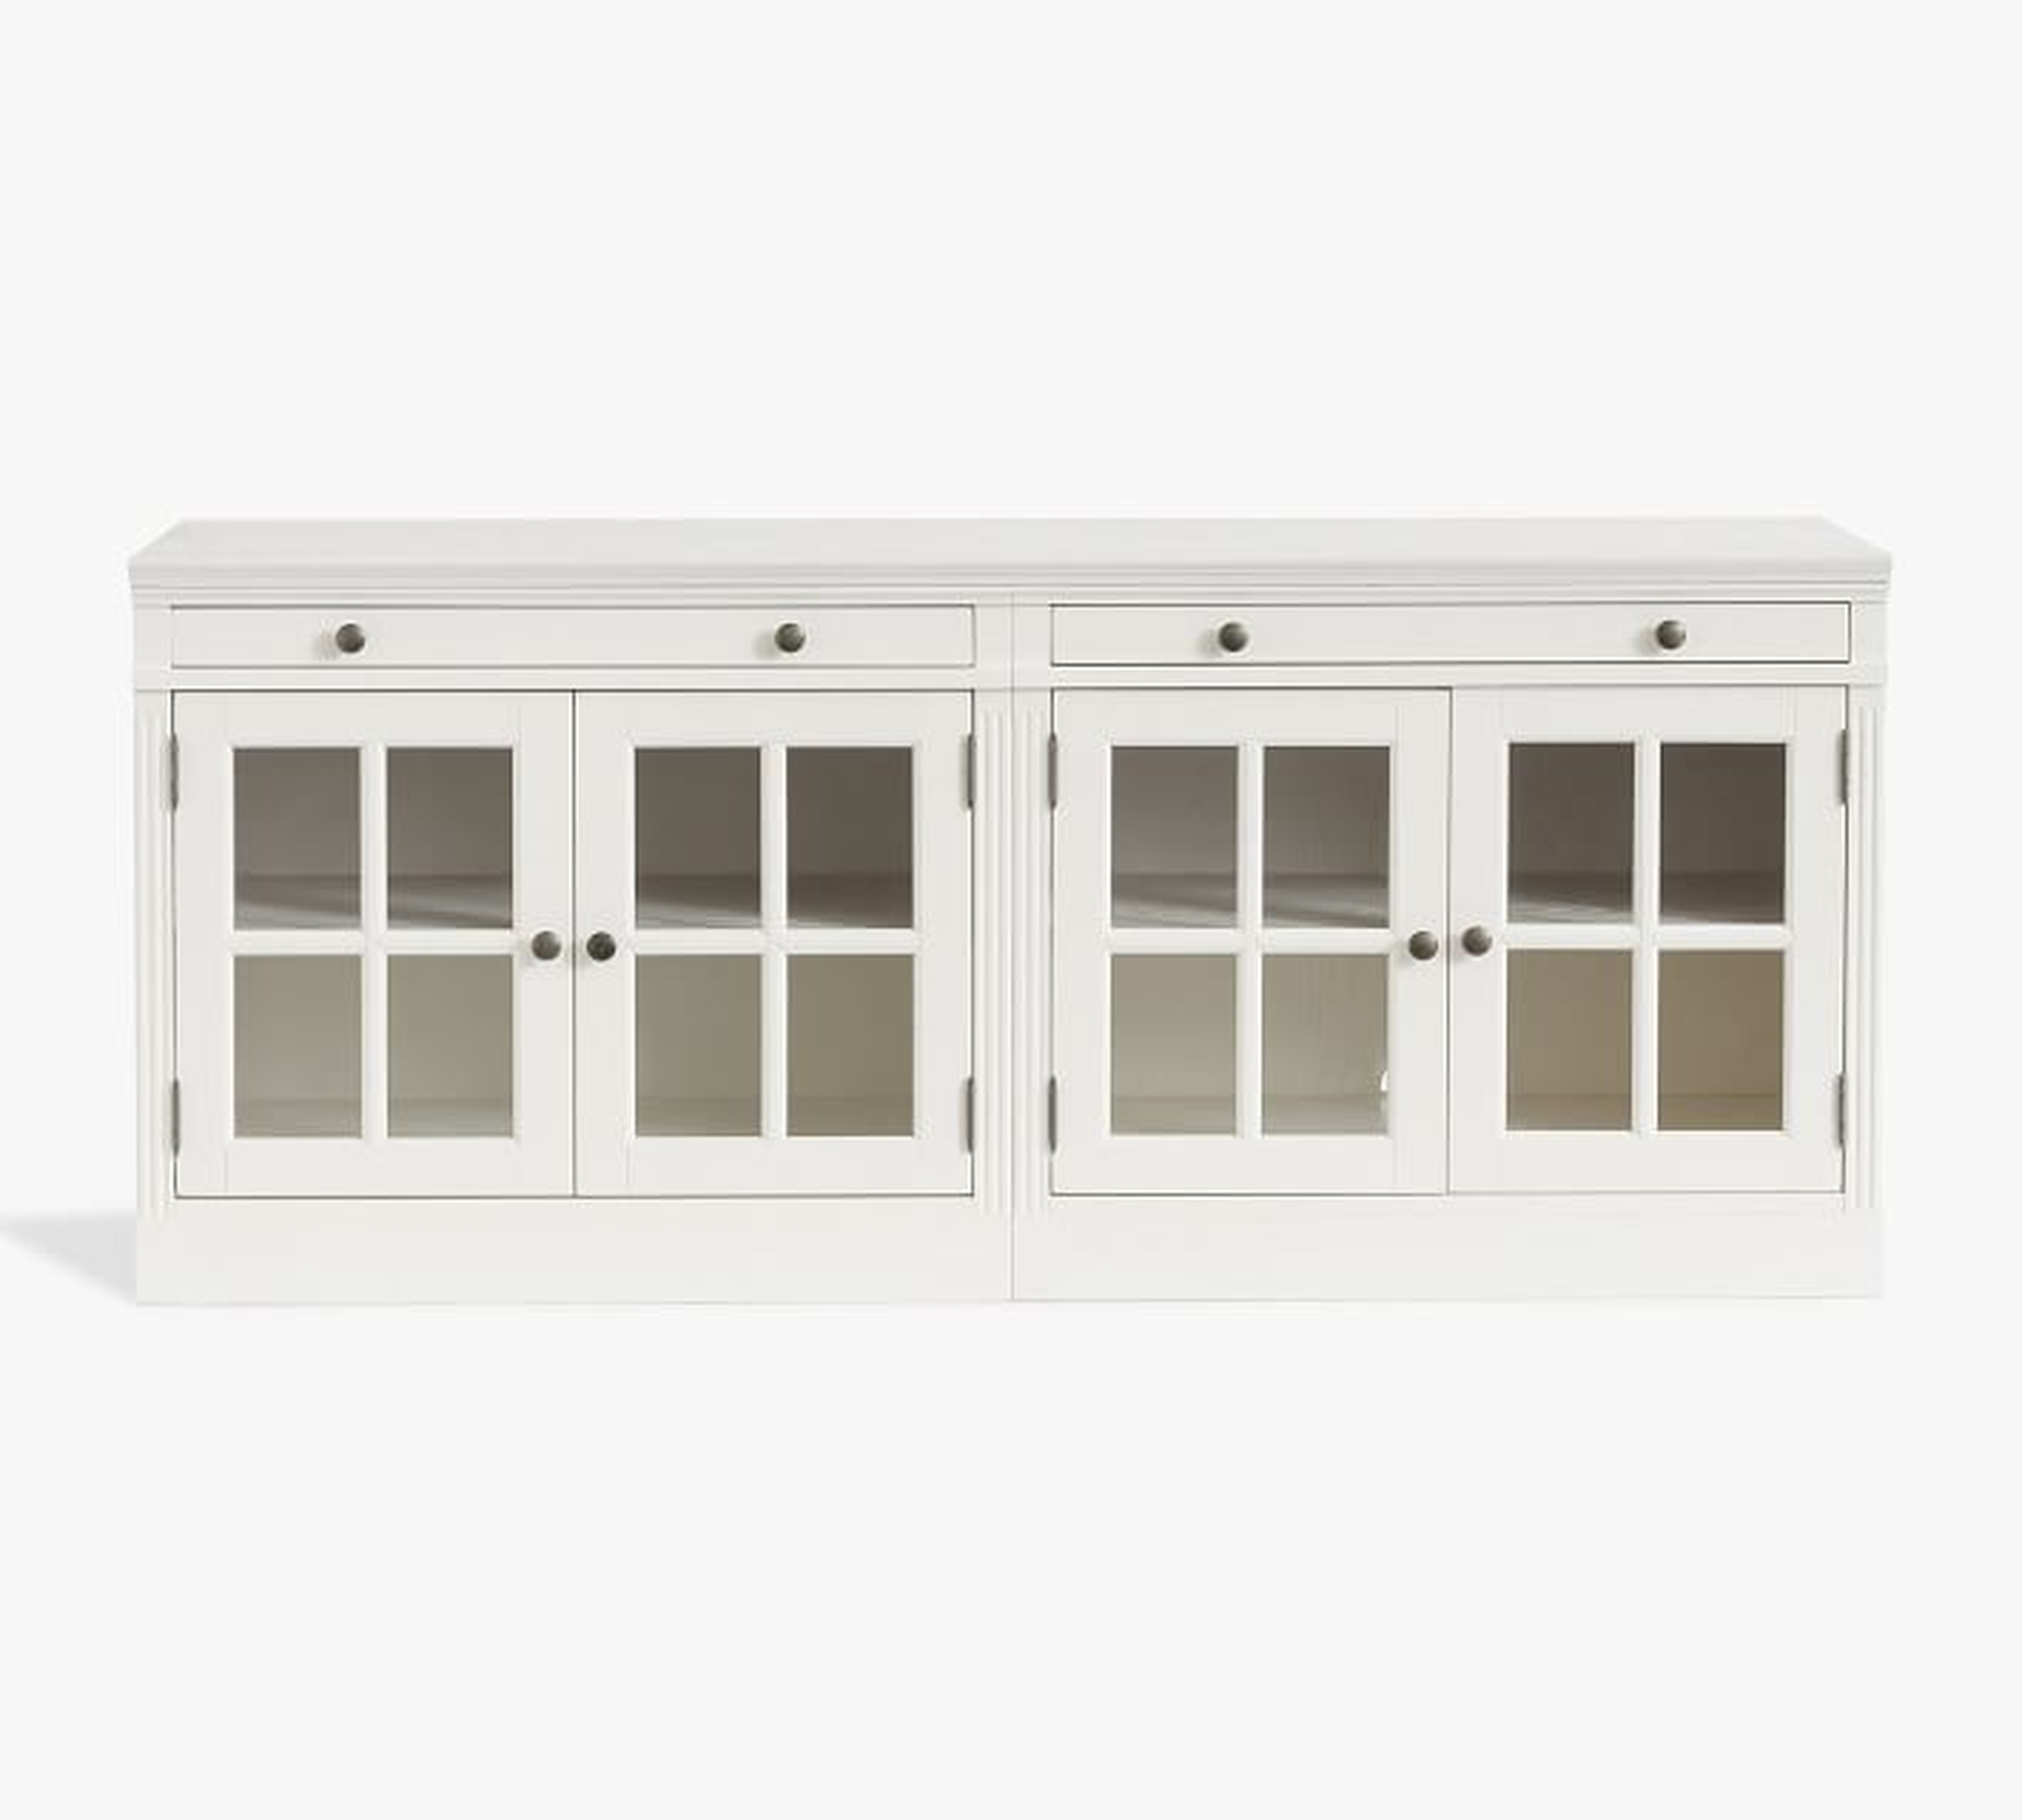 Livingston 70" Media Console with Glass Cabinets, Montauk White - Pottery Barn